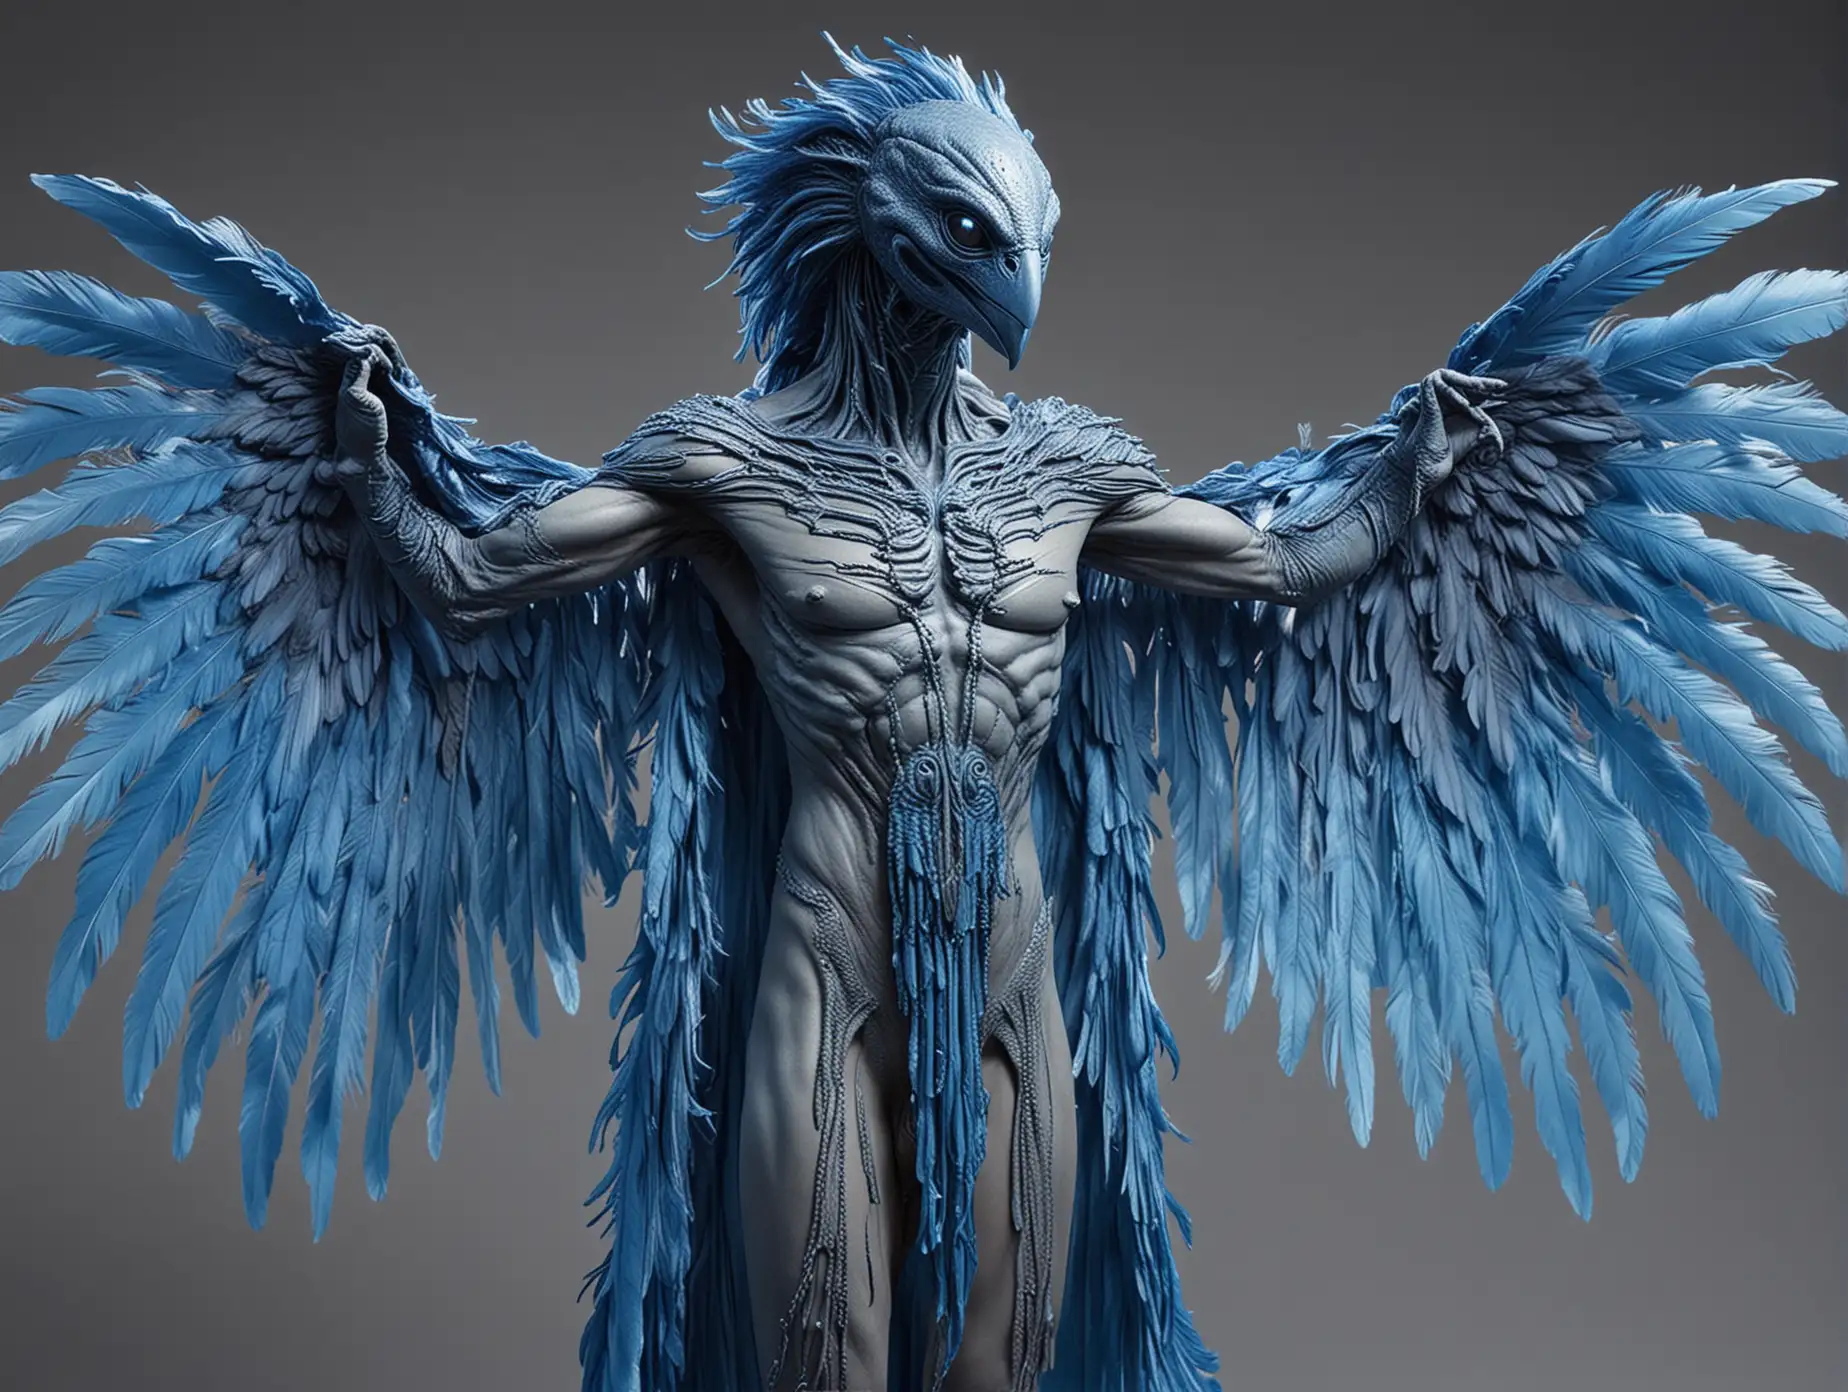 Really hot blue feathered alien with bird features and attractive feathery wings, perfect in every way that would excite any guy; 6' tall / see-through floating robe